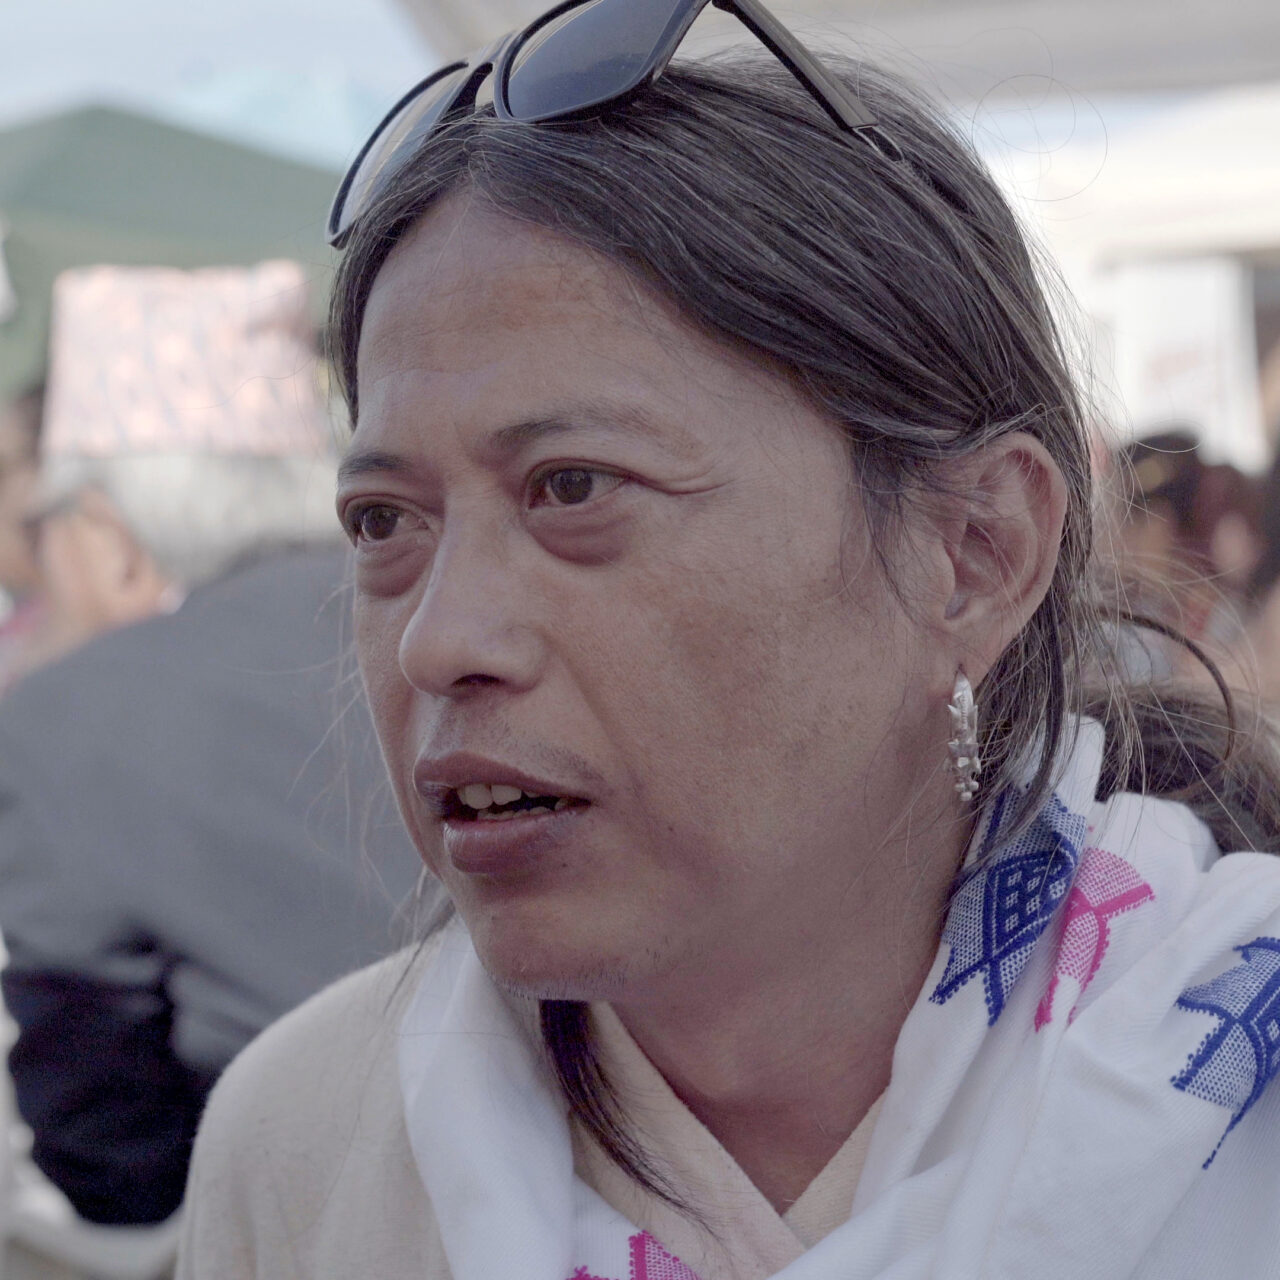 An indigenous Yakthung person with long hair, silver earrings, traditional white scarf with blue and pink star patterns.